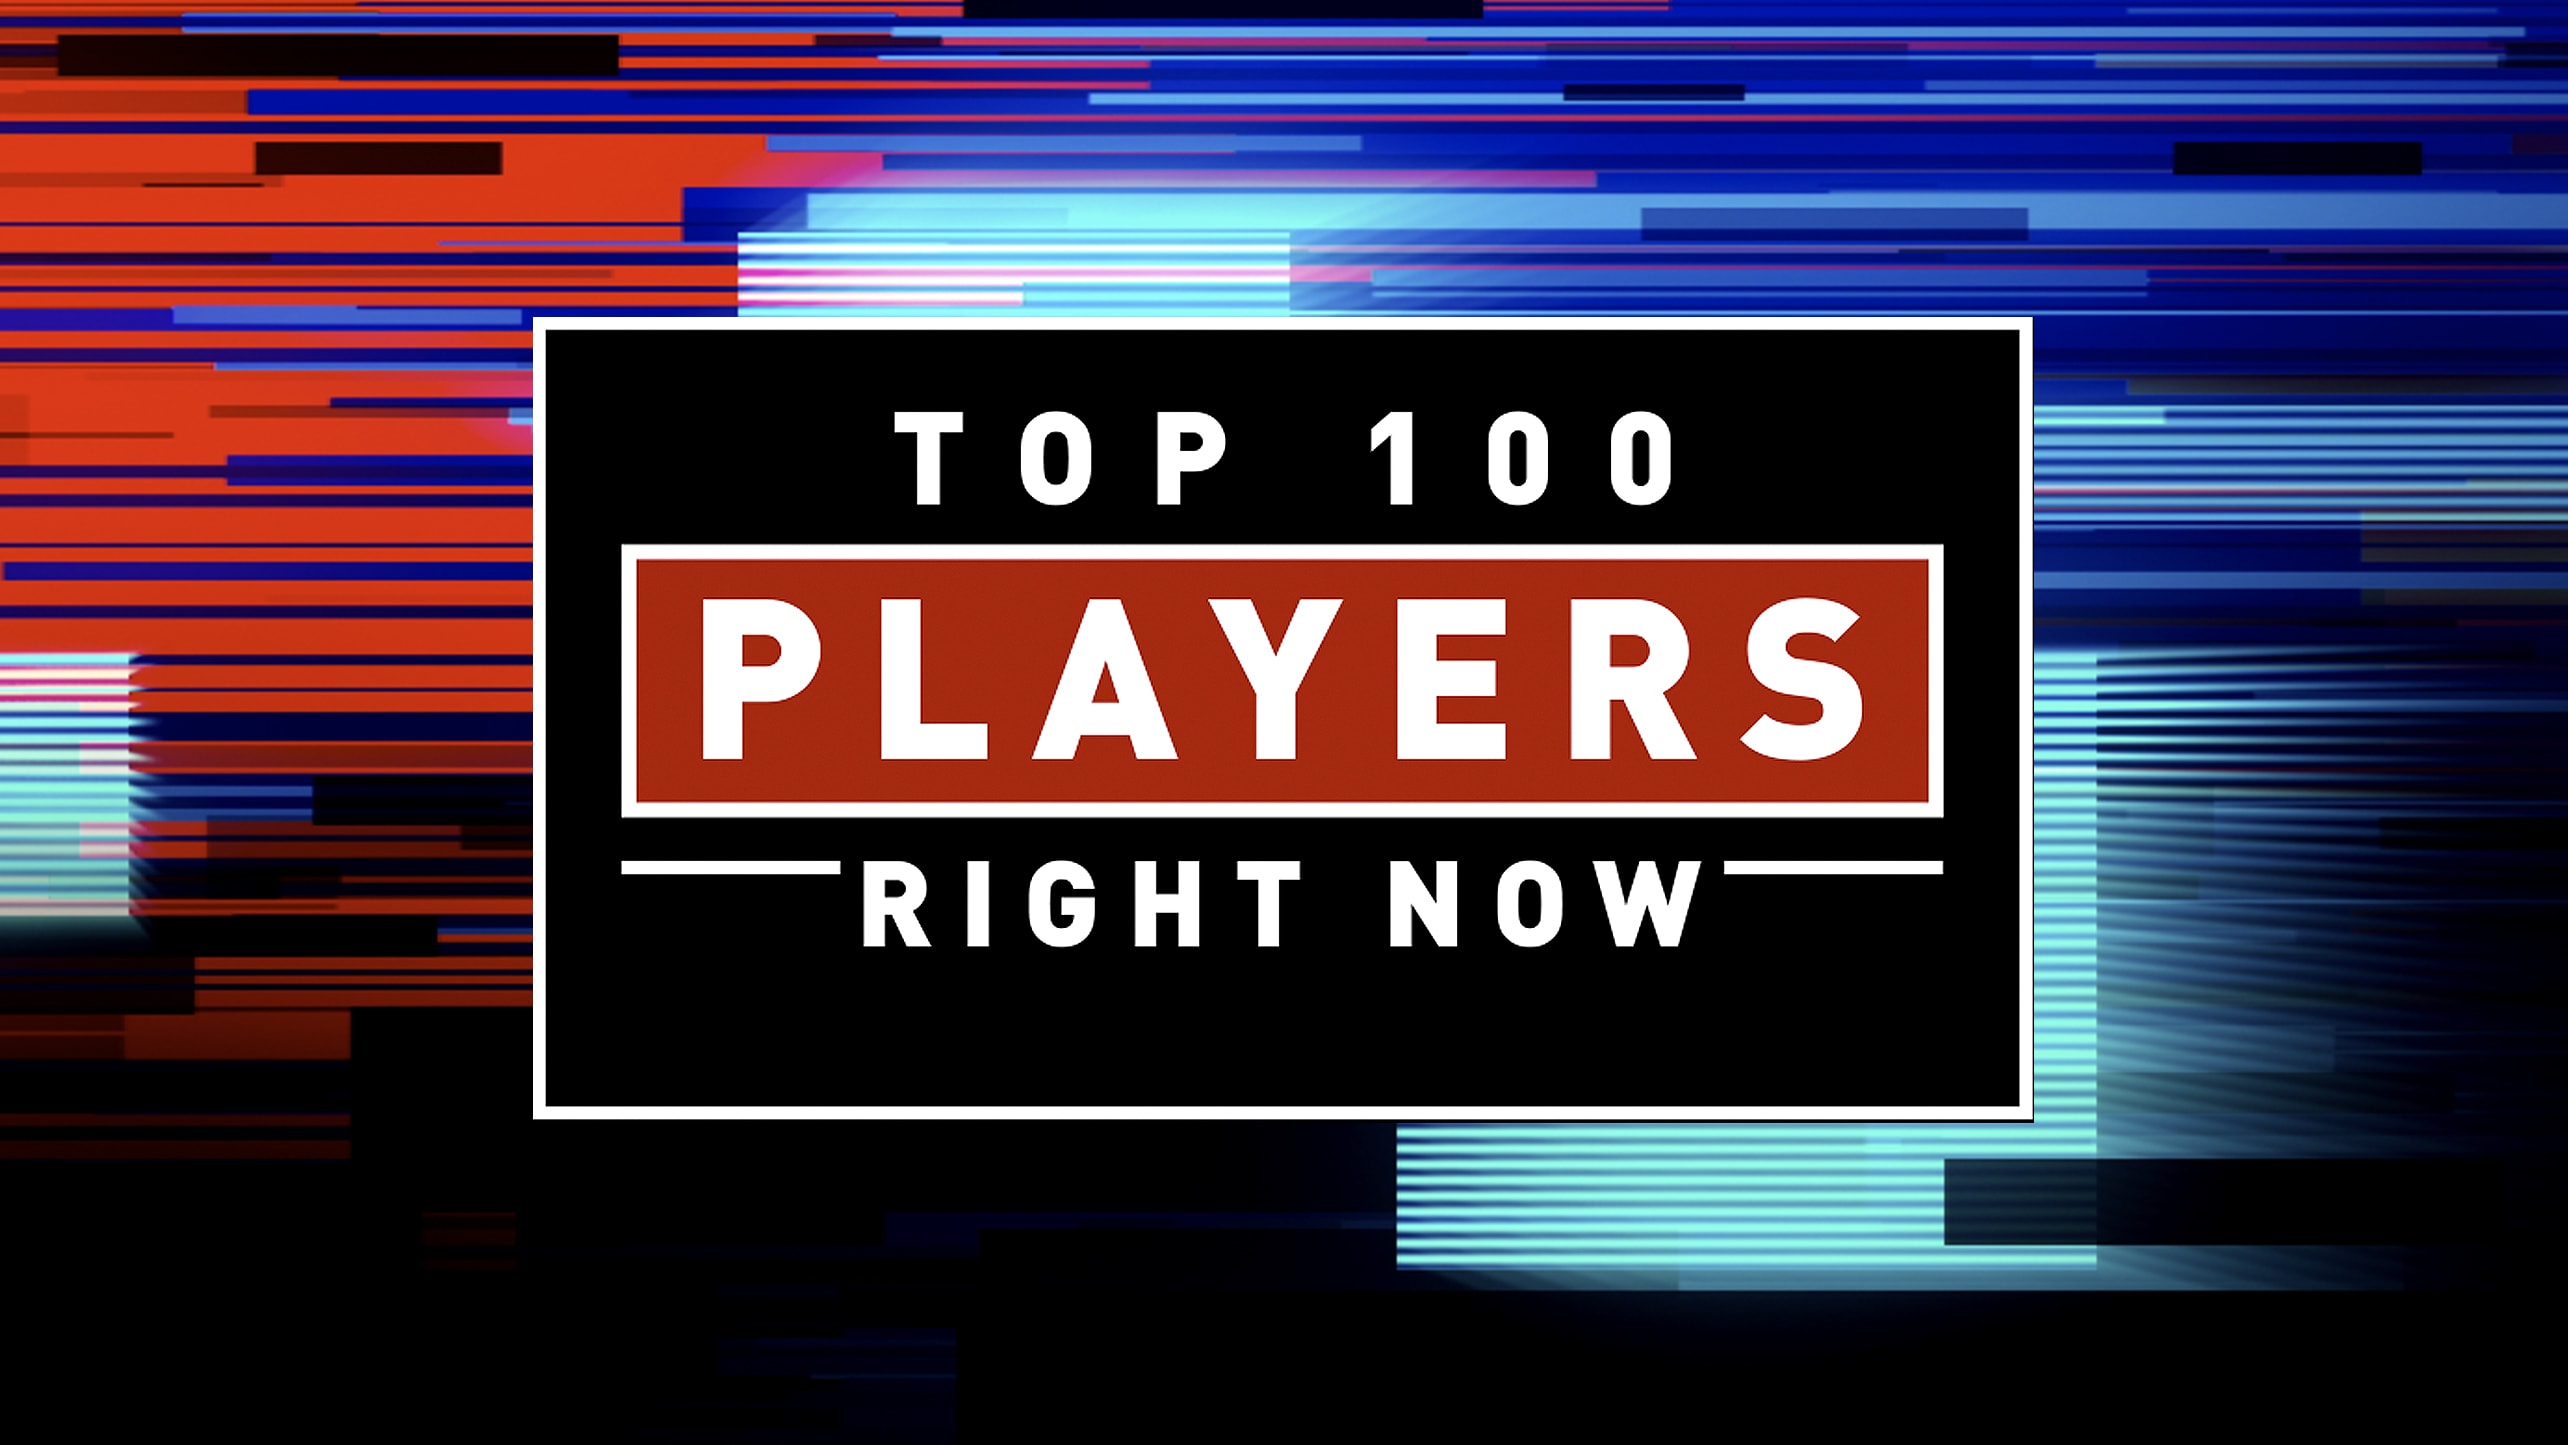 Top 100 Players Right Now